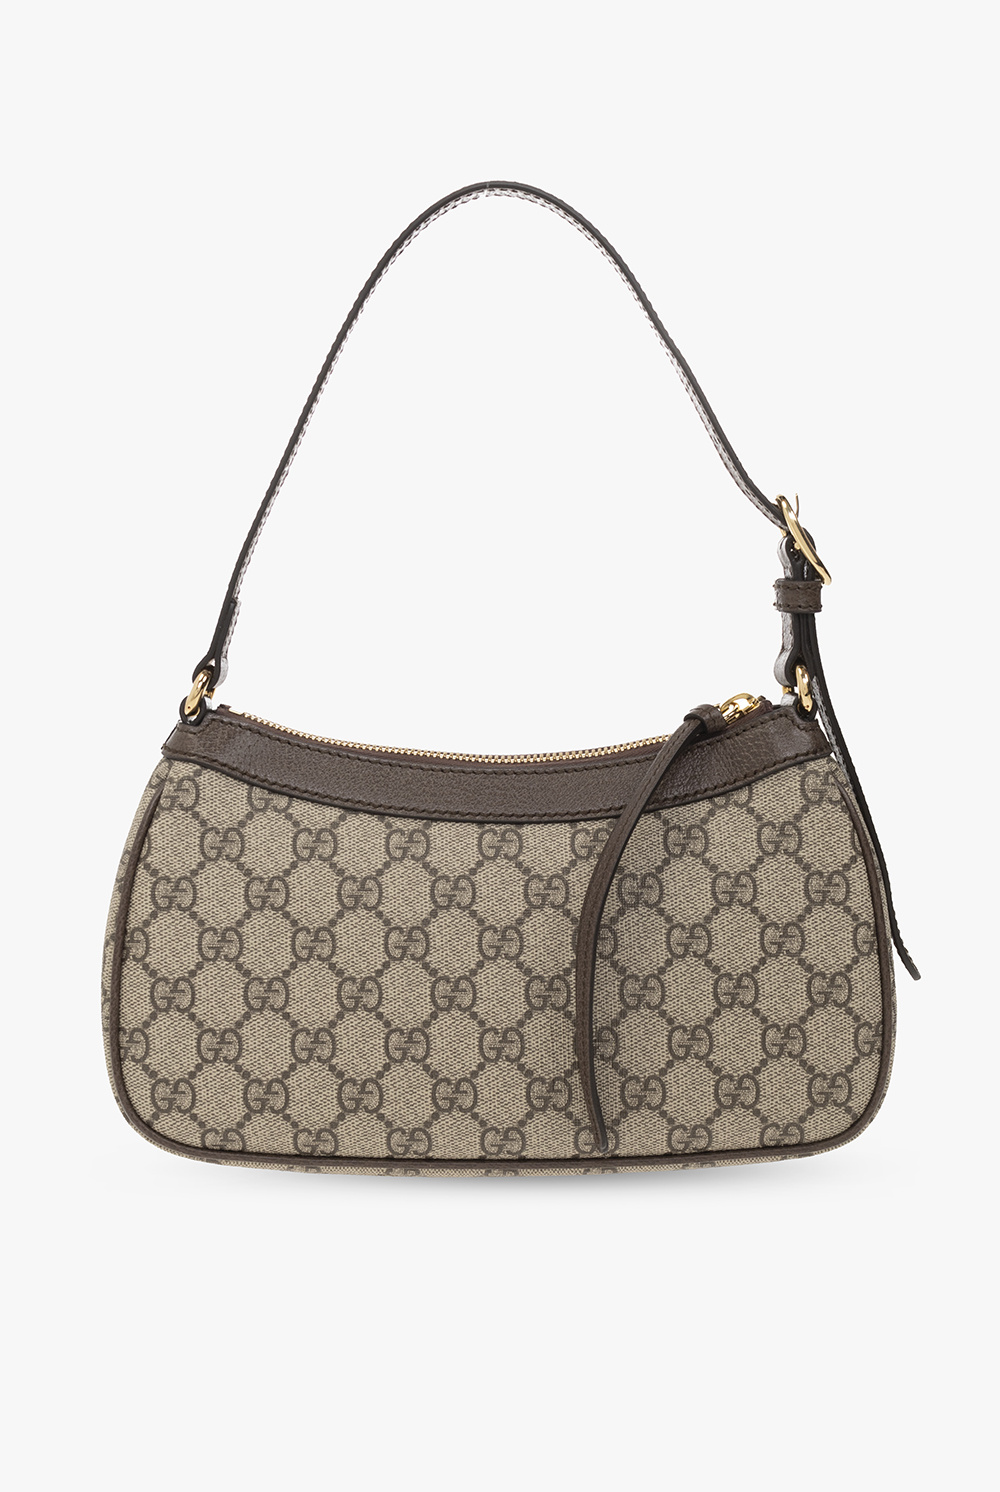 Beige 'Ophidia Small' shoulder bag Gucci - Vitkac Italy